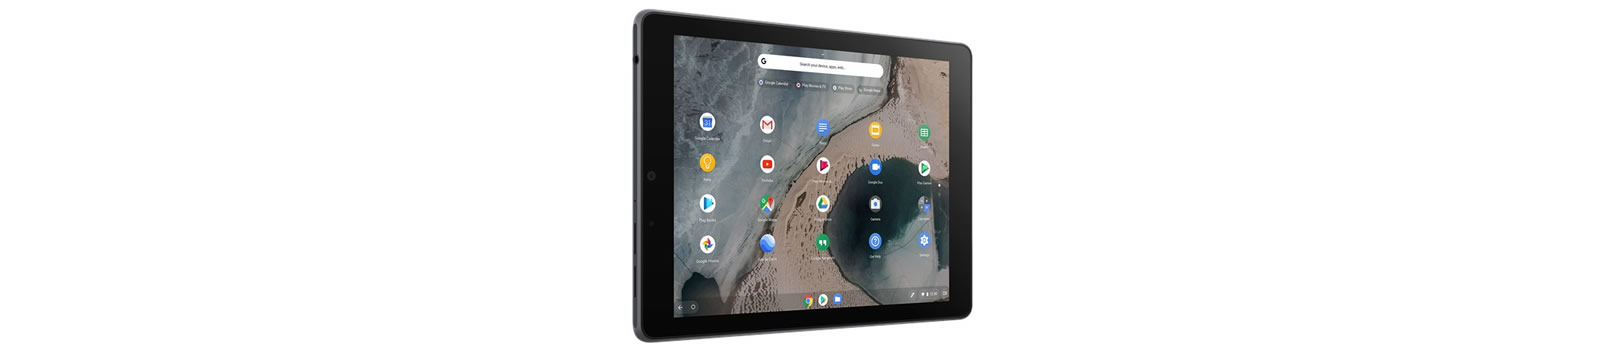 Chromebook Tablet CT100PA banner